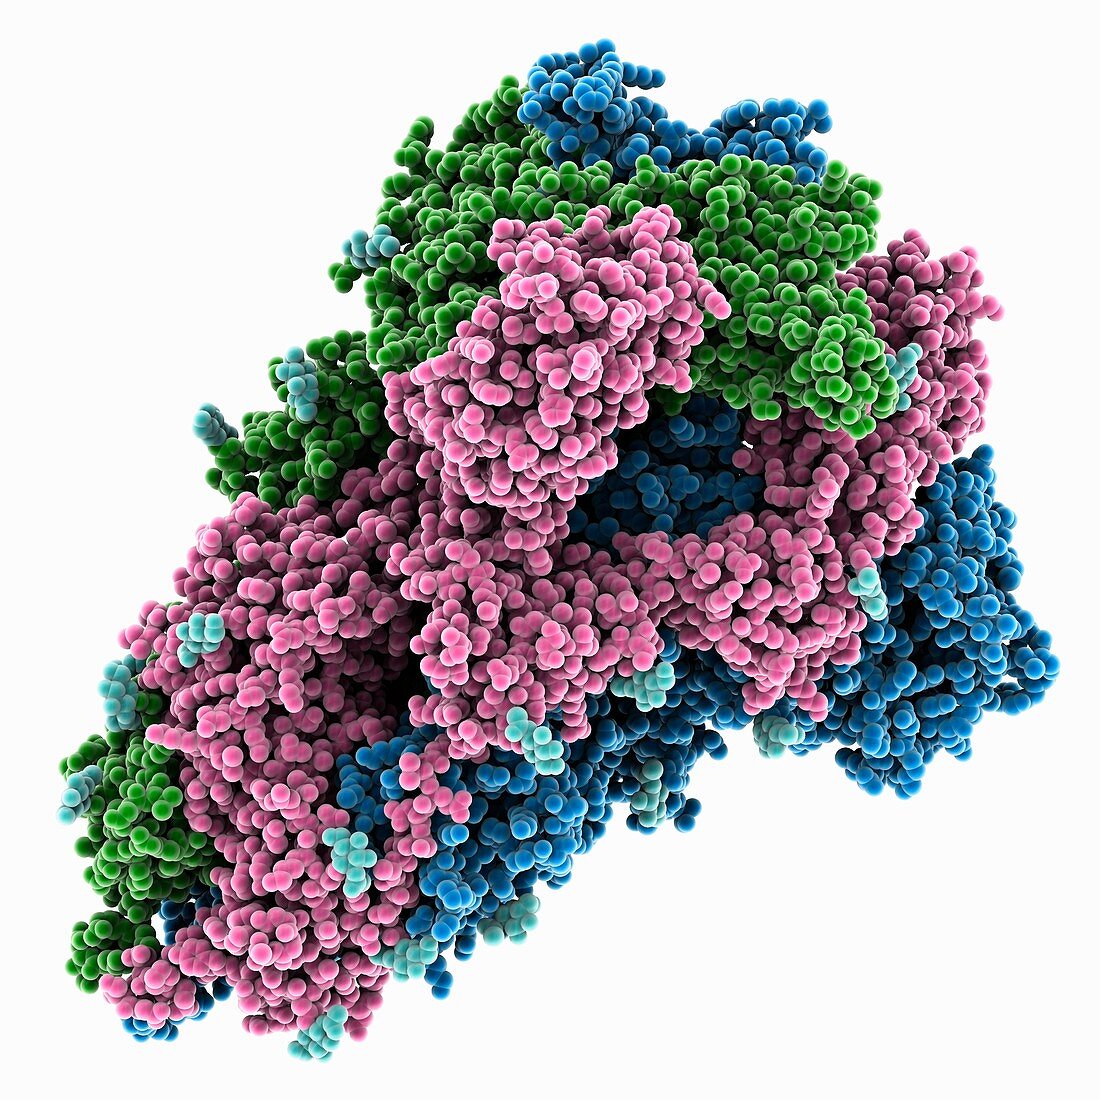 South African SARS-CoV-2 spike protein, molecular model